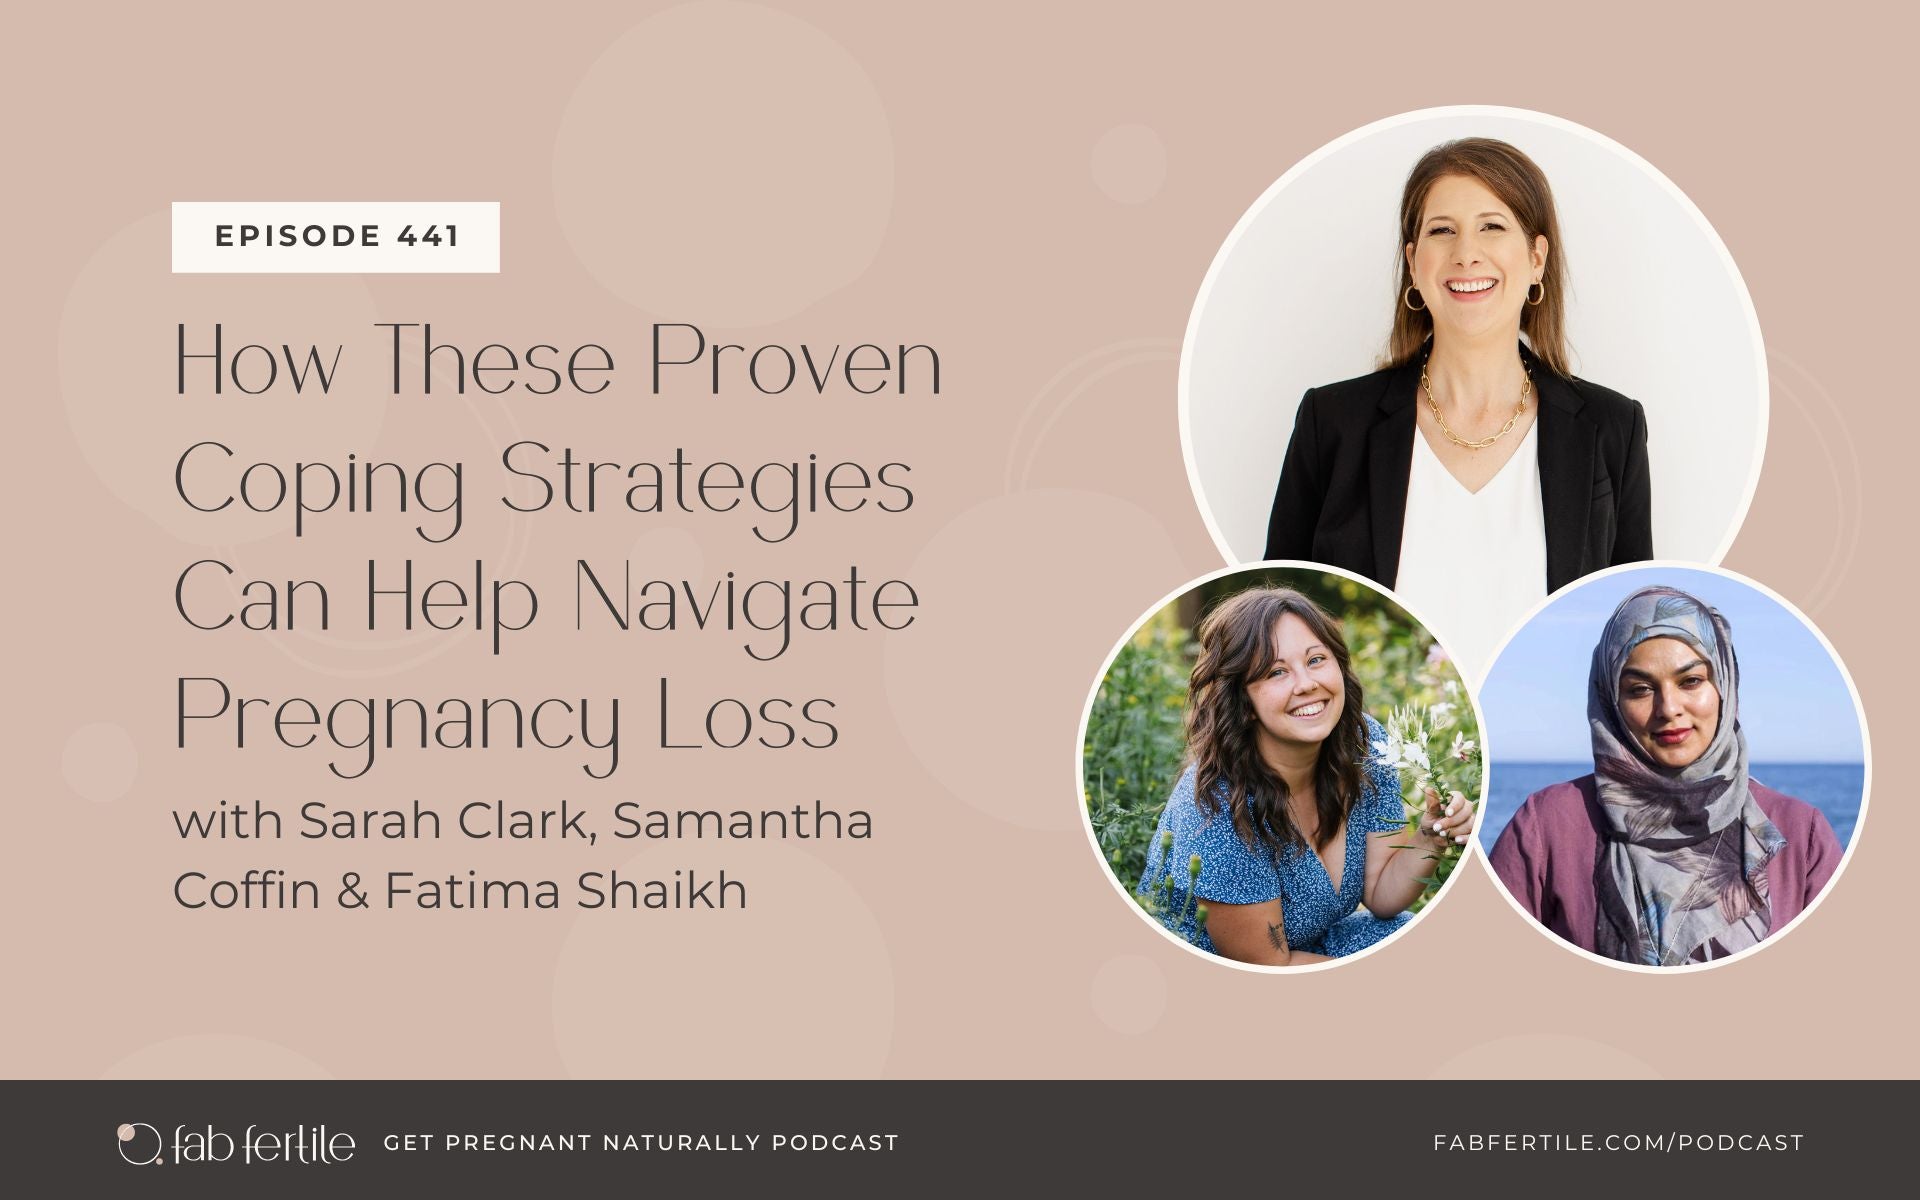 How These Proven Coping Strategies Can Help Navigate Pregnancy Loss